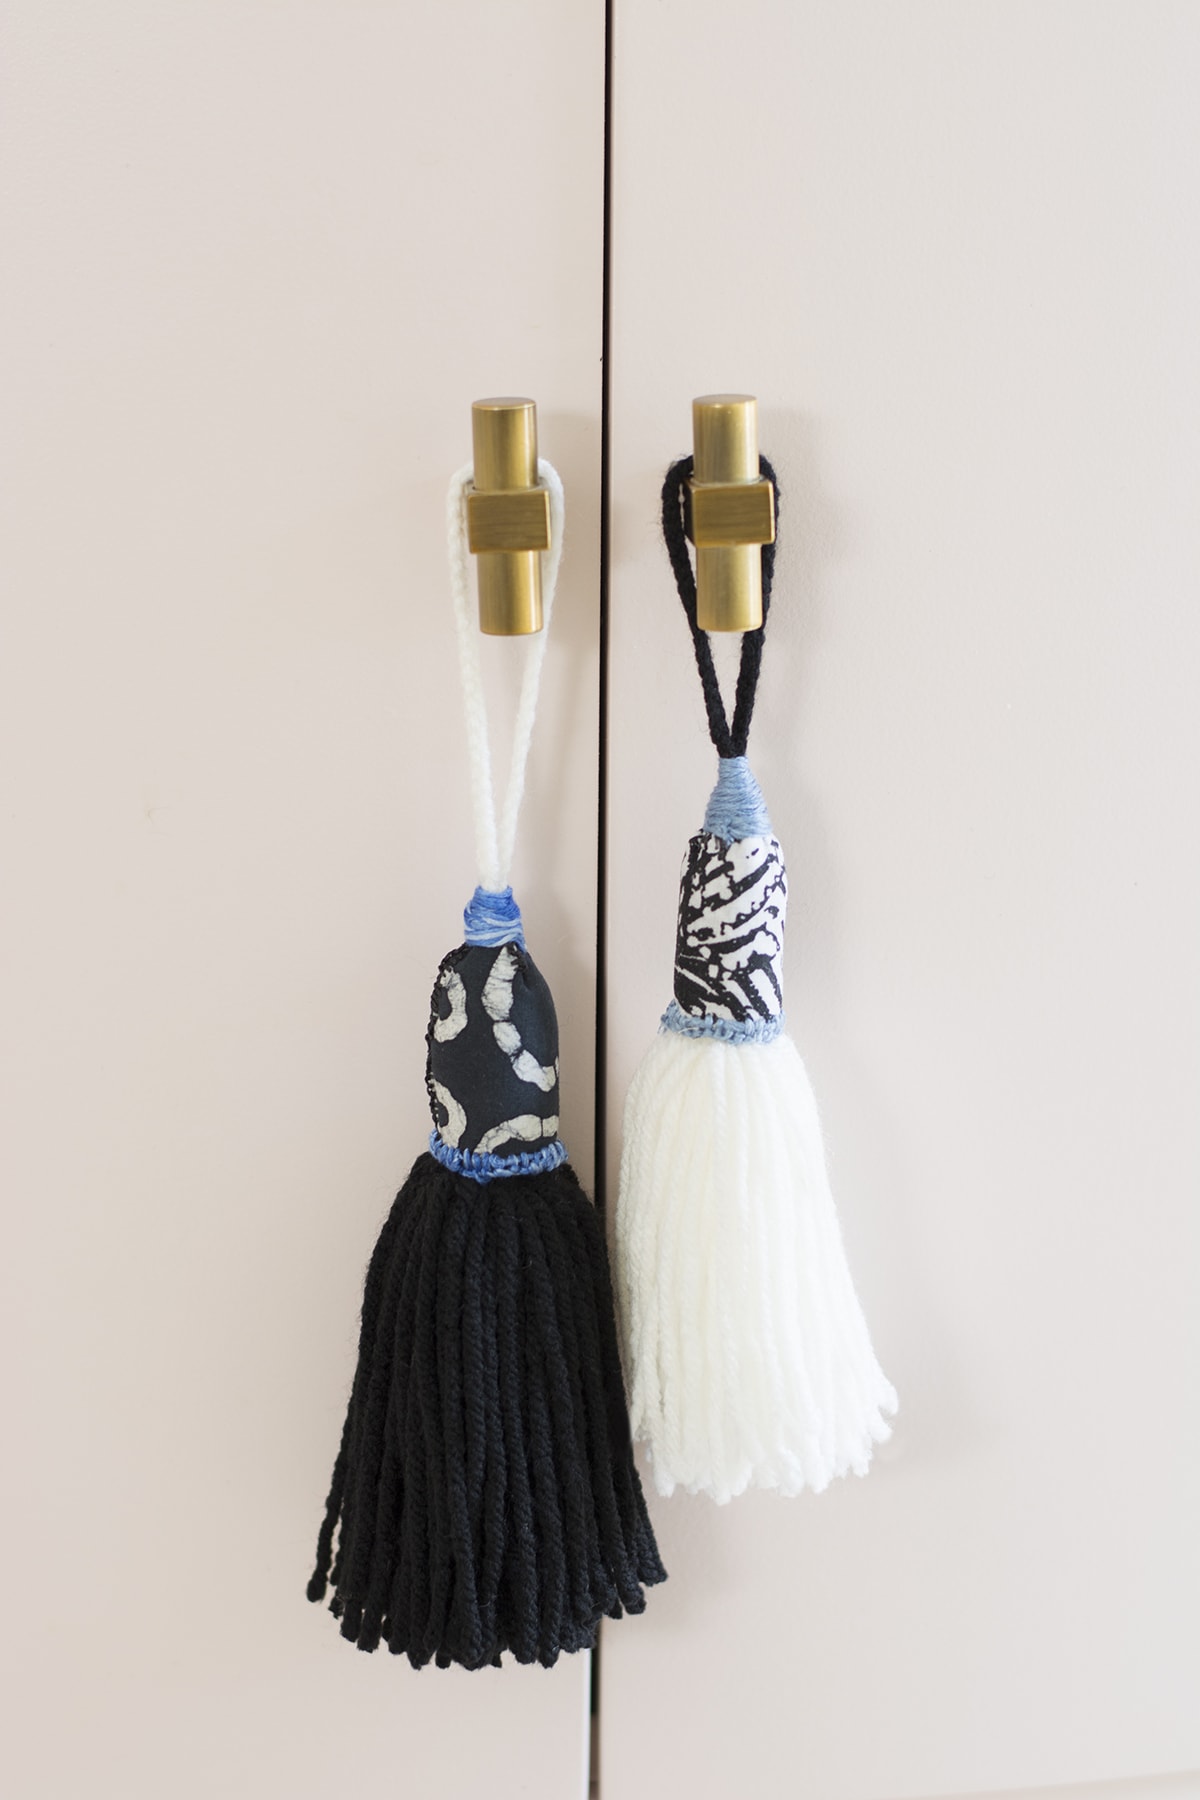 How to make yarn tassels with a unique twist